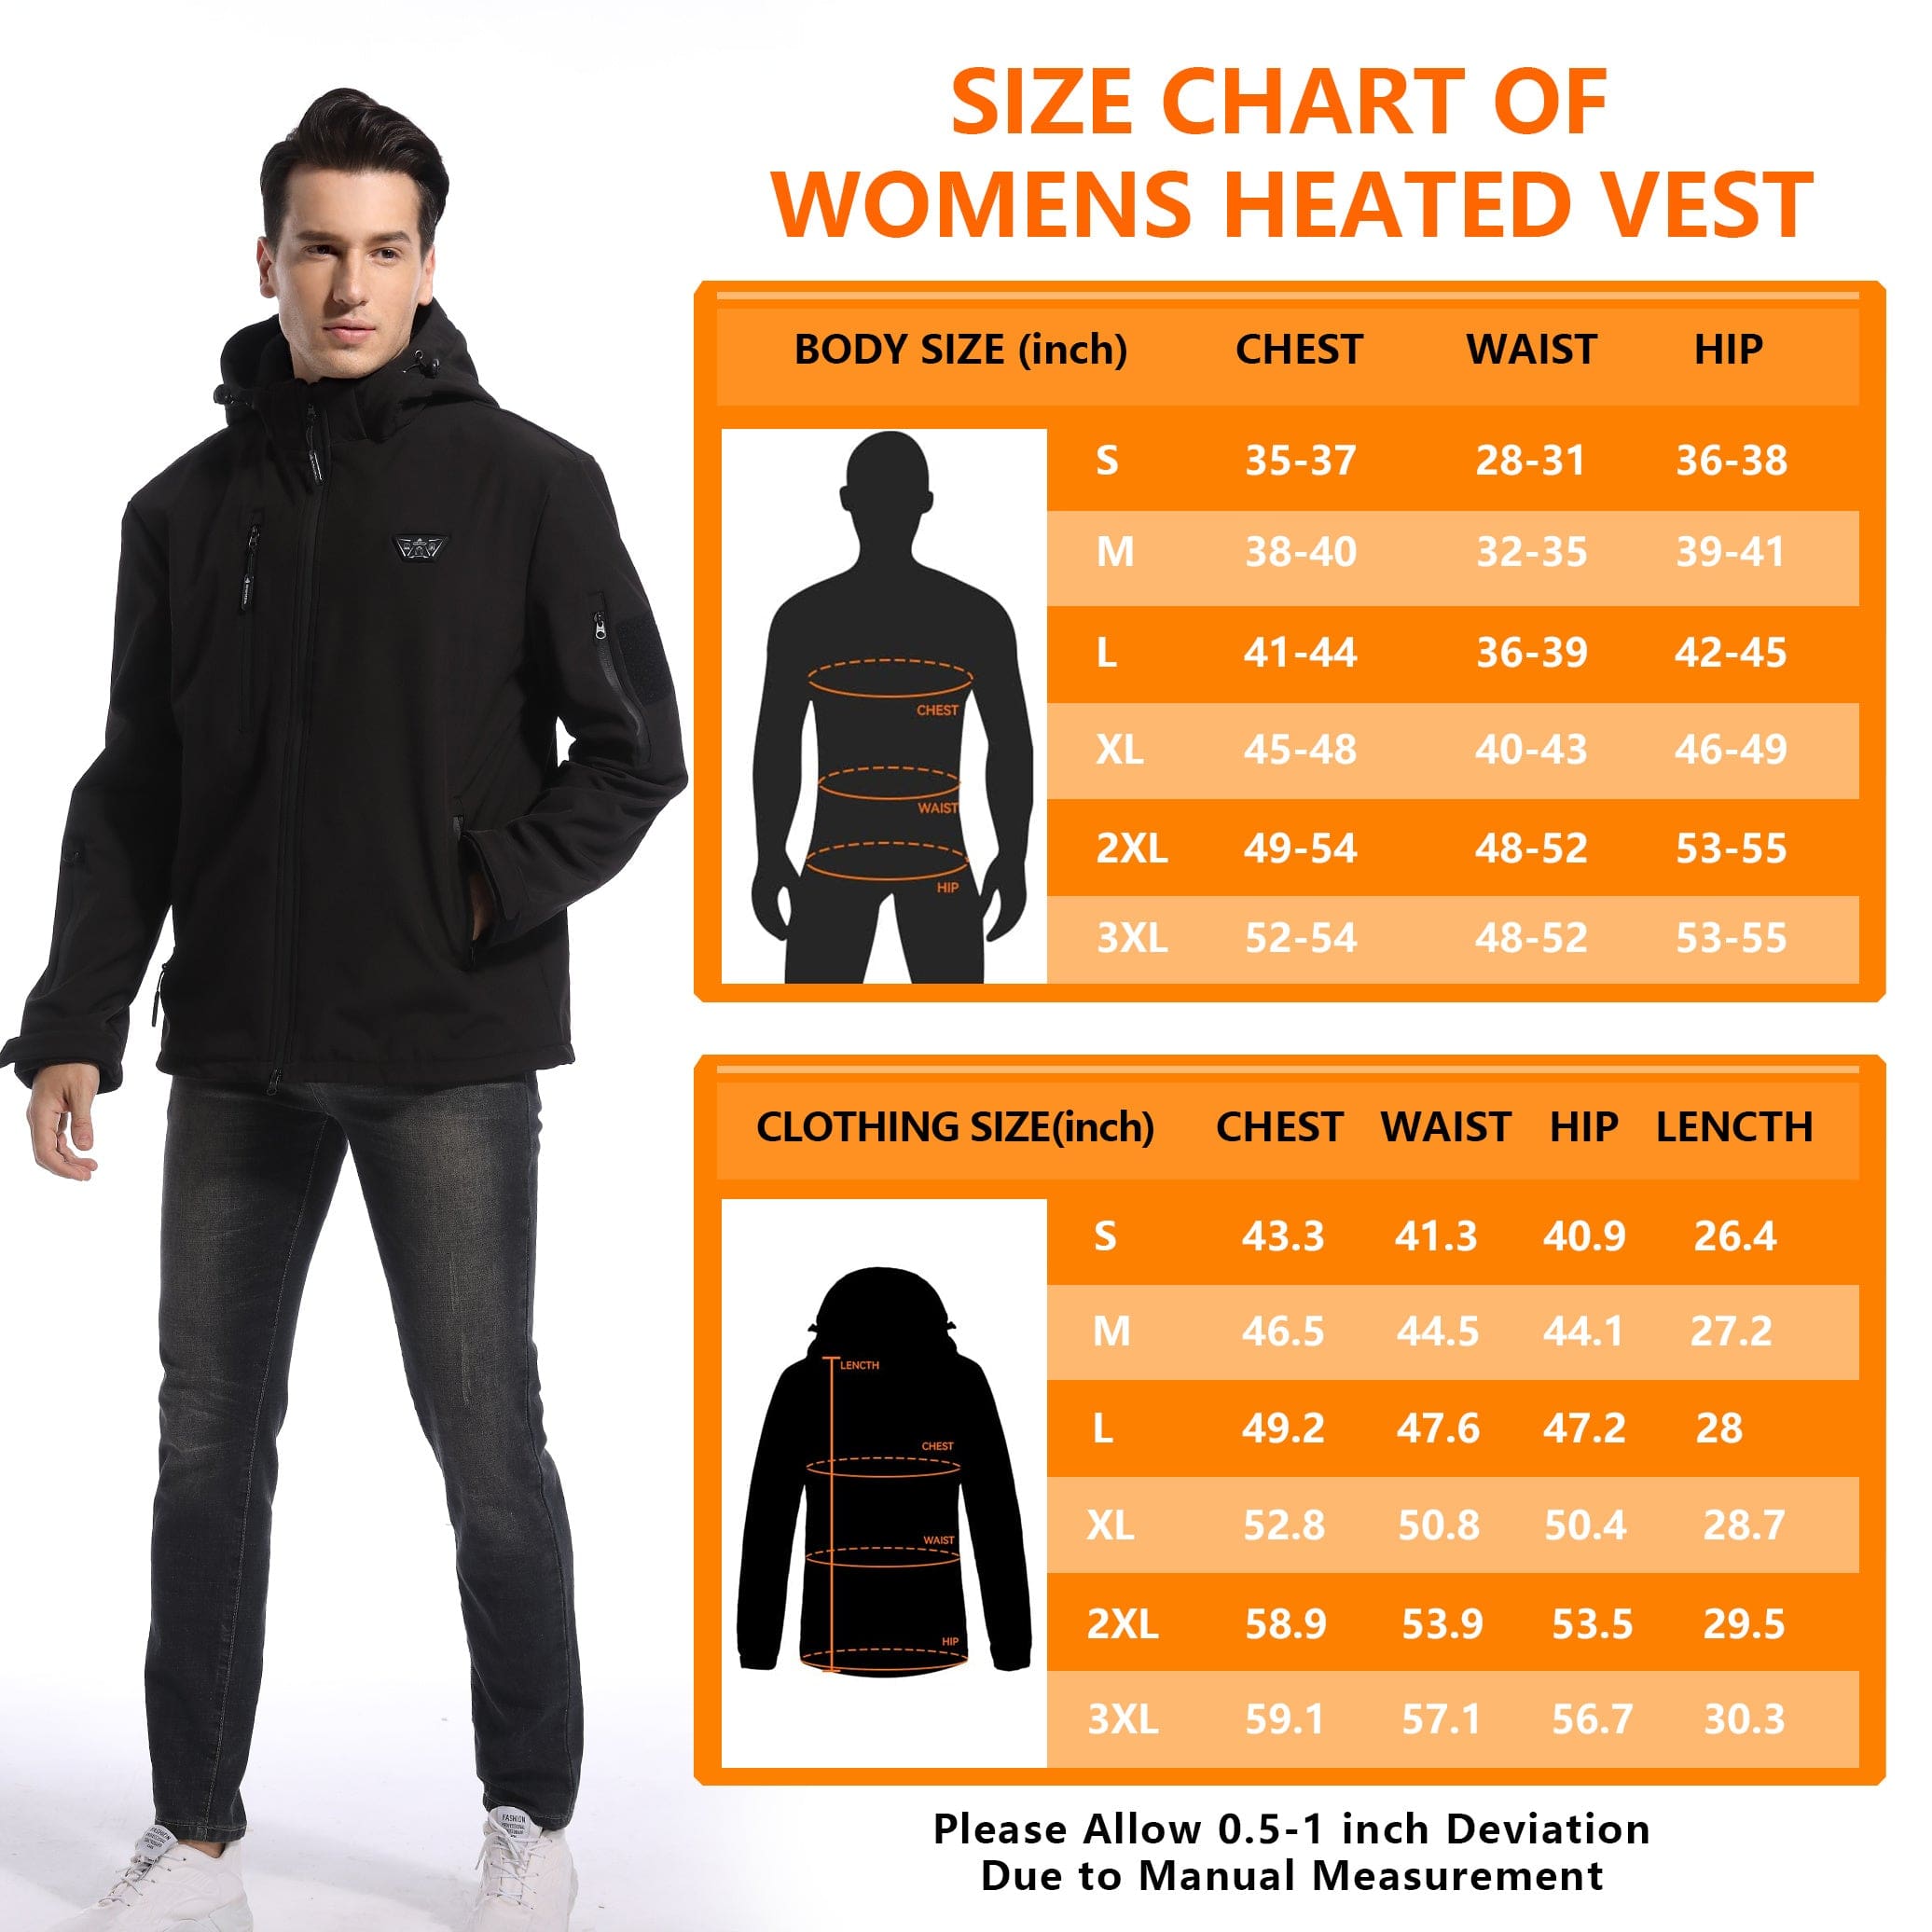 Men's Heated Jacket For Outdoor Sports, Skiing, Hiking - Machine Washable Jacket In Black - Premium Heated Jacket from PIFMYSEDOL - Just $105.28! Shop now at Prepared Bee